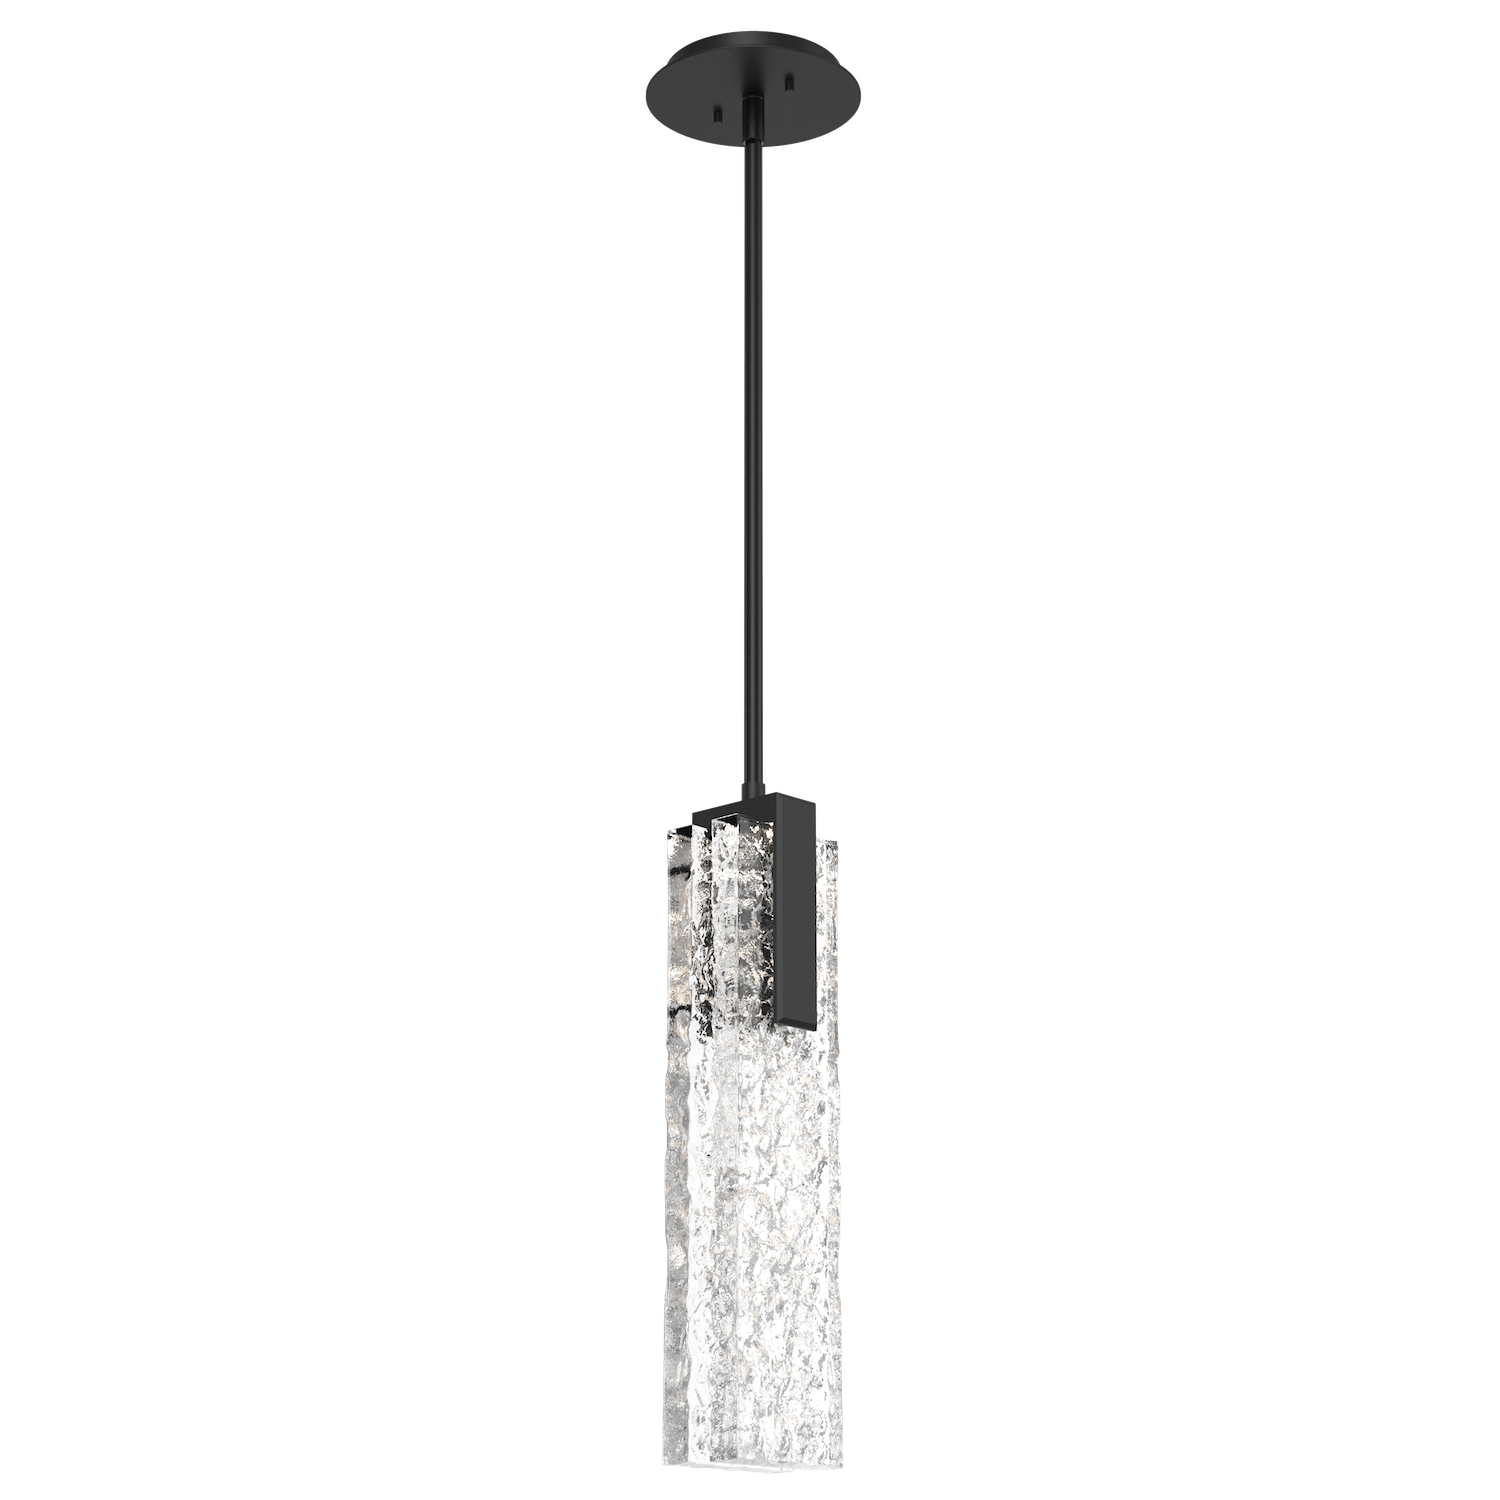 LAB0061-17-MB-GC-Hammerton-Studio-Glacier-pendant-light-with-matte-black-finish-and-clear-blown-glass-with-geo-clear-cast-glass-diffusers-and-LED-lamping